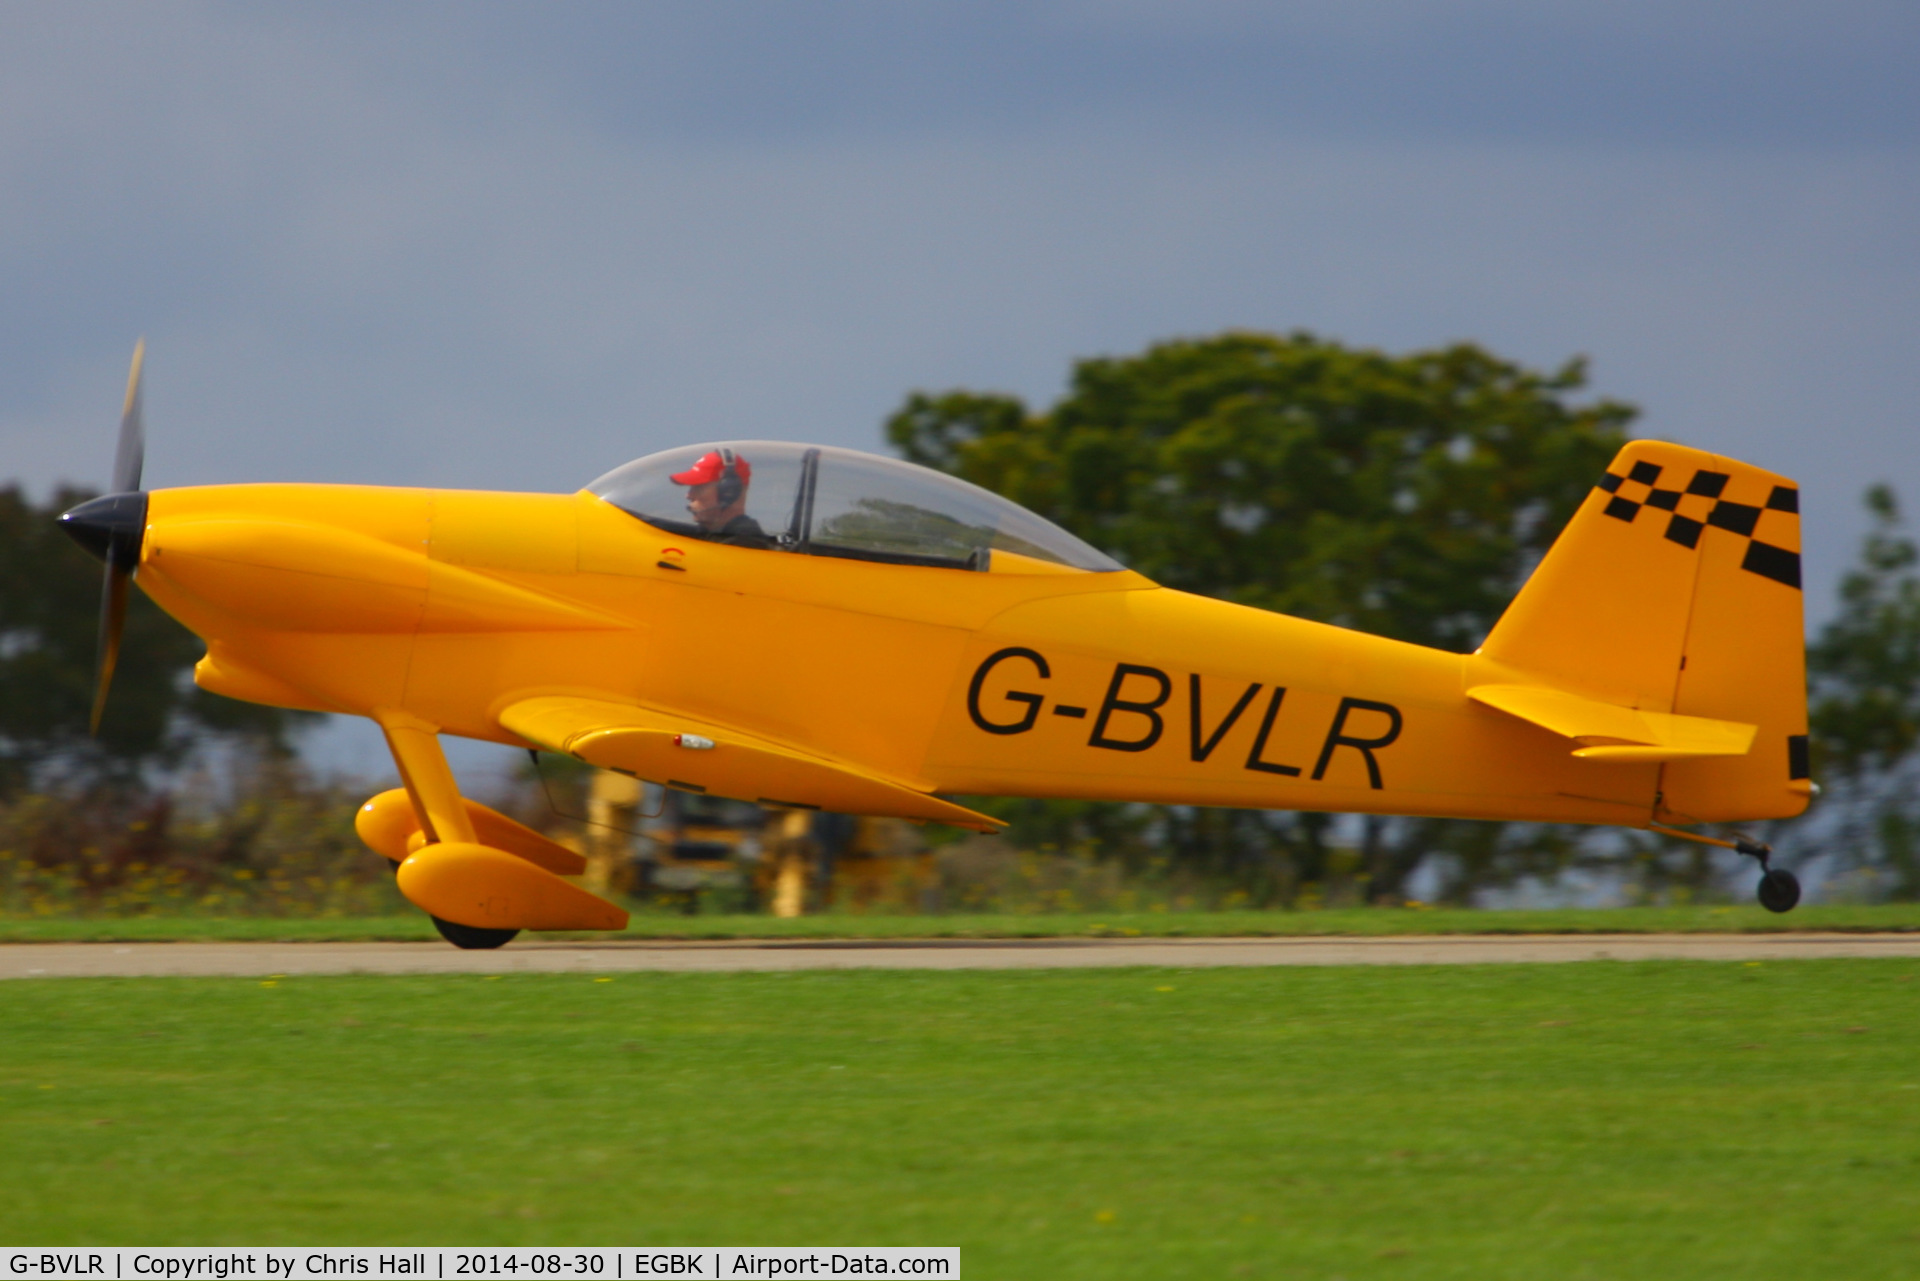 G-BVLR, 1994 Vans RV-4 C/N PFA 181-12306, at the LAA Rally 2014, Sywell